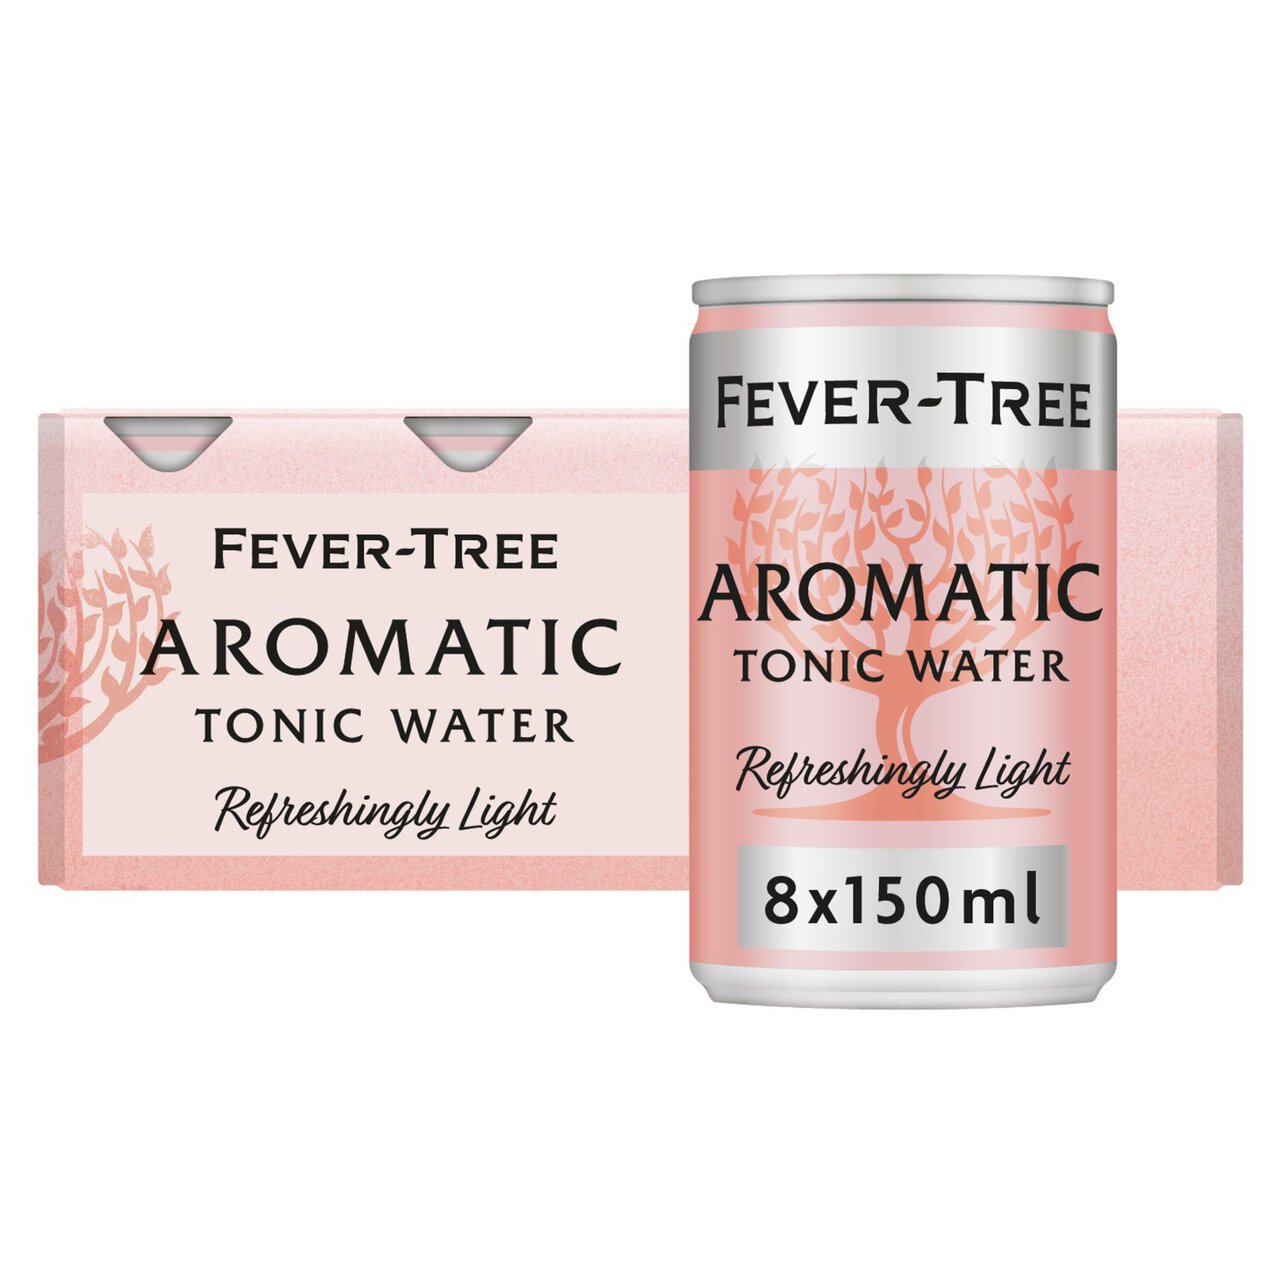 Fever-Tree Light Aromatic Tonic Water Cans 8 x 150ml